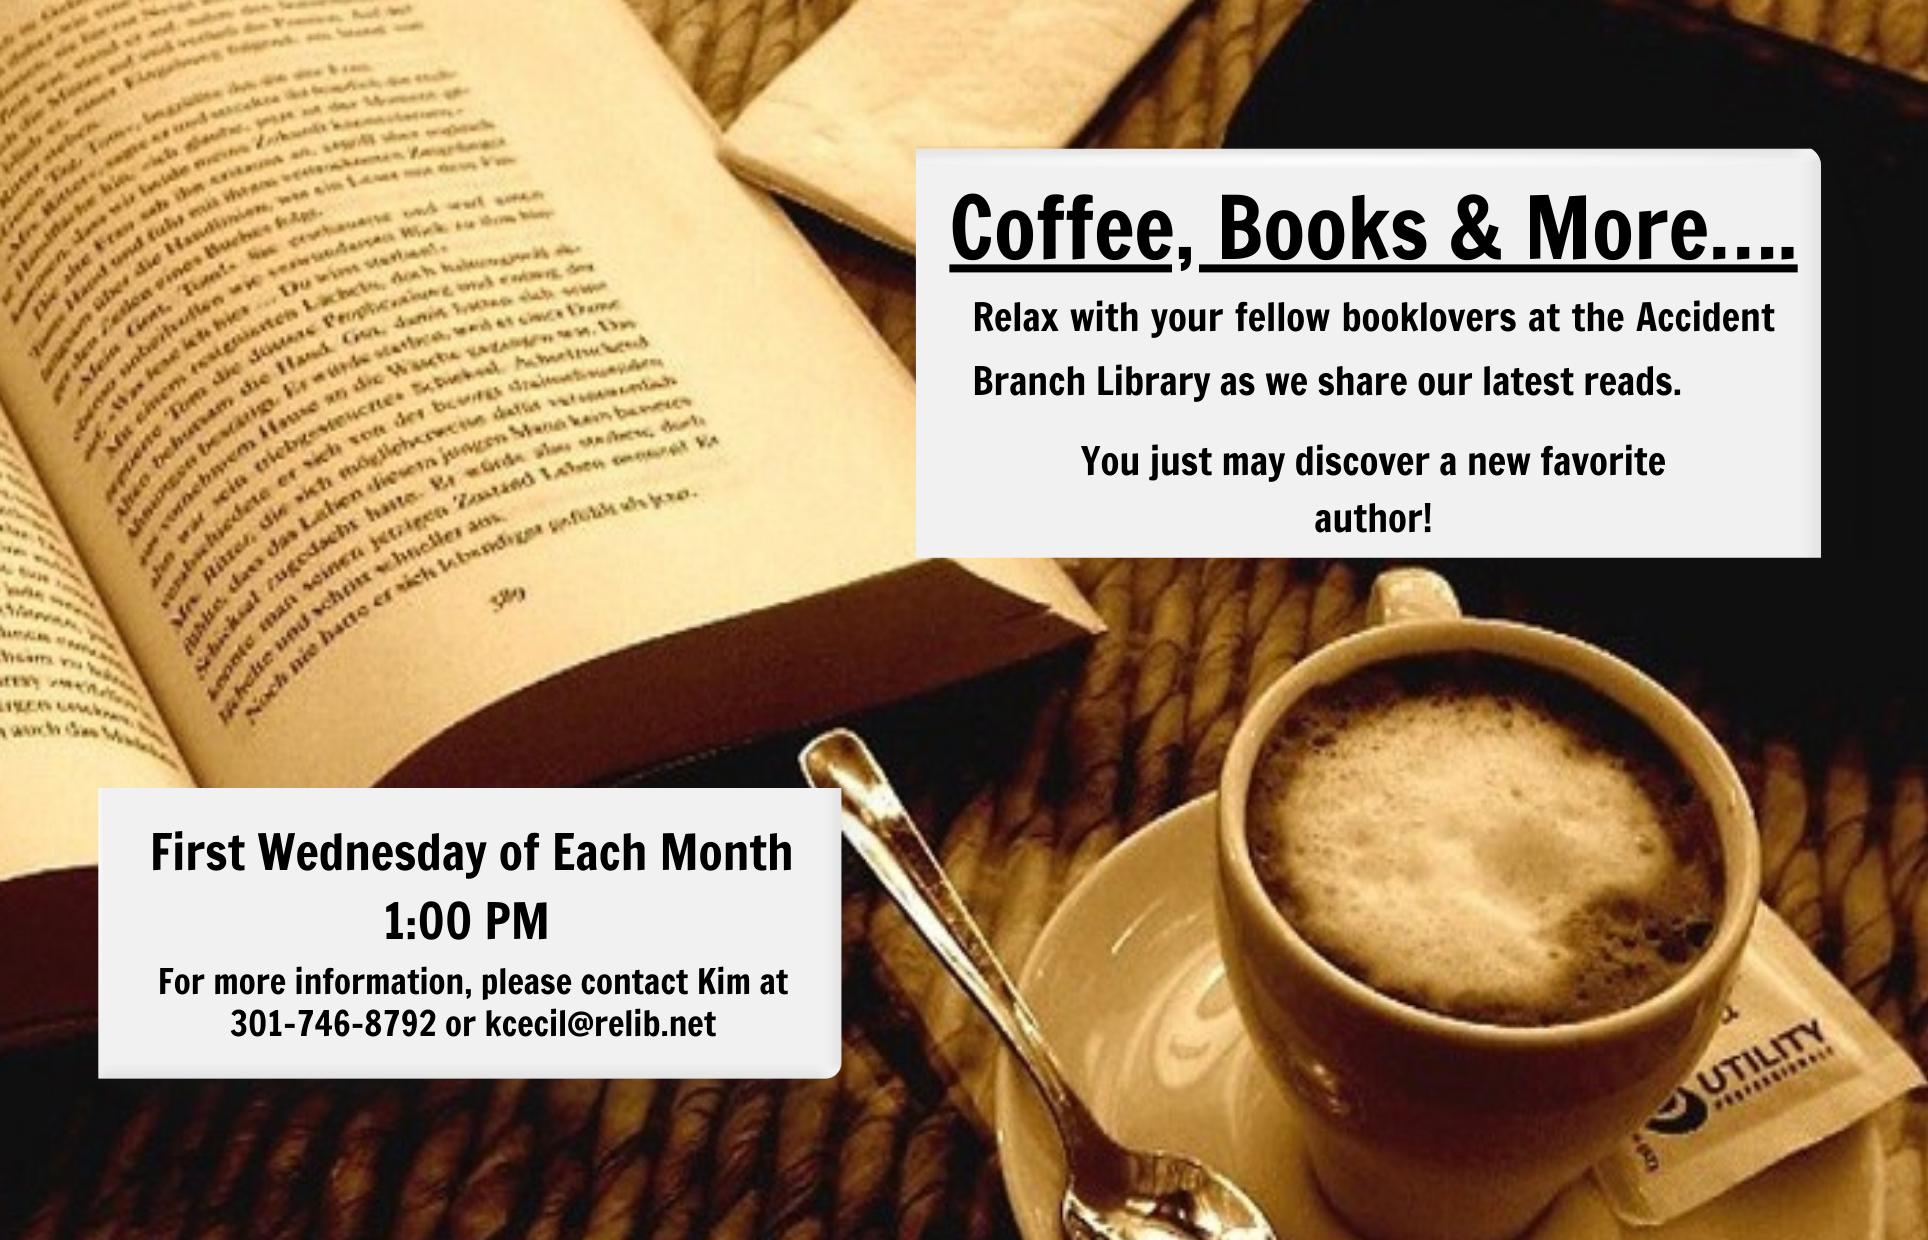 Coffee, Books & More at the Accident Branch Library 1st Wednesday of Each Month @ 1PM